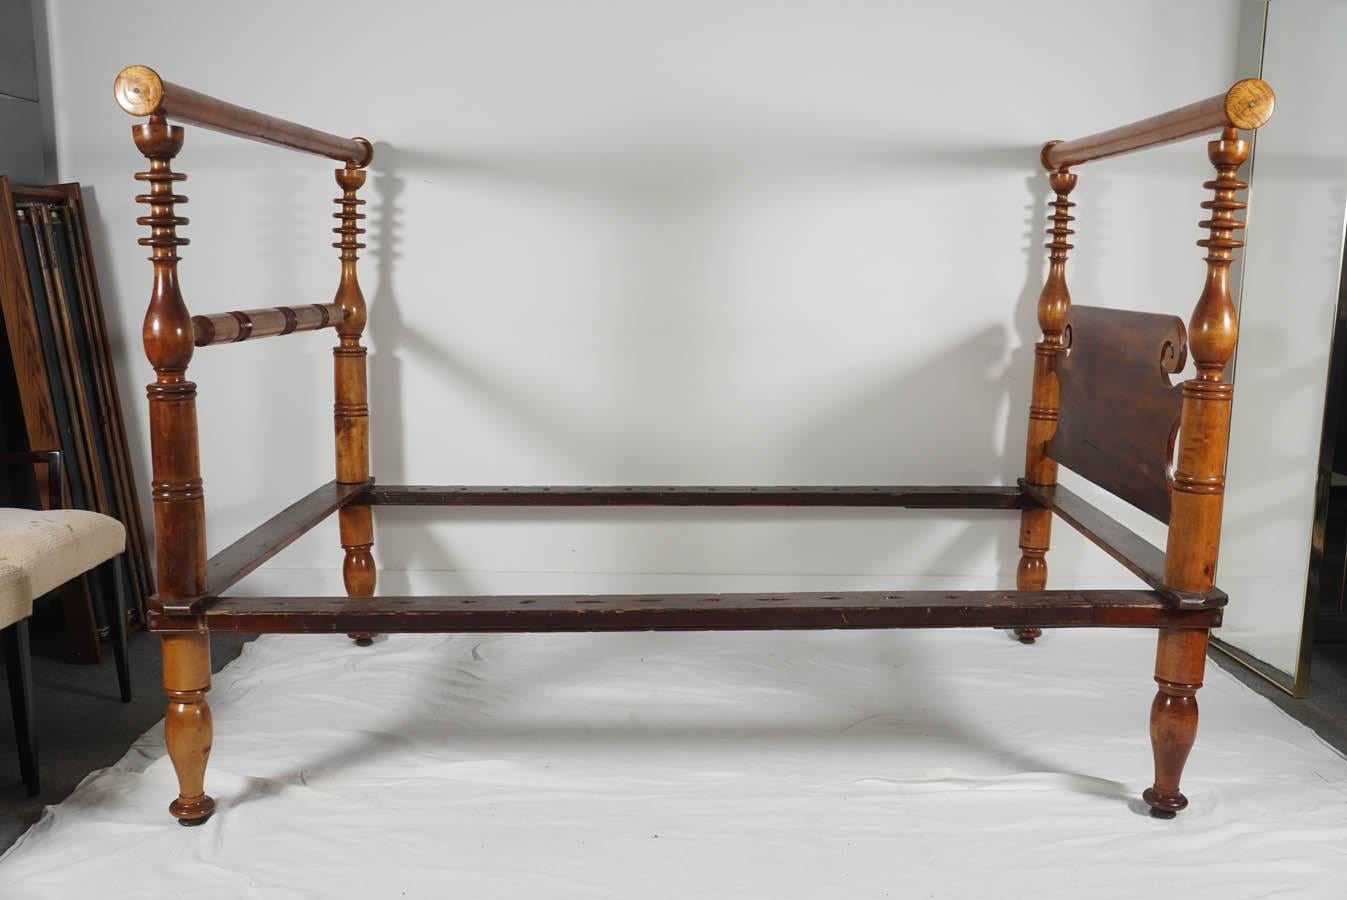 Great design is great design. This bed has a unique modern look from a 100 year old bed. Frame is in great condition. Great age patina to finish. We can add the rope for the mattress support. A great find!